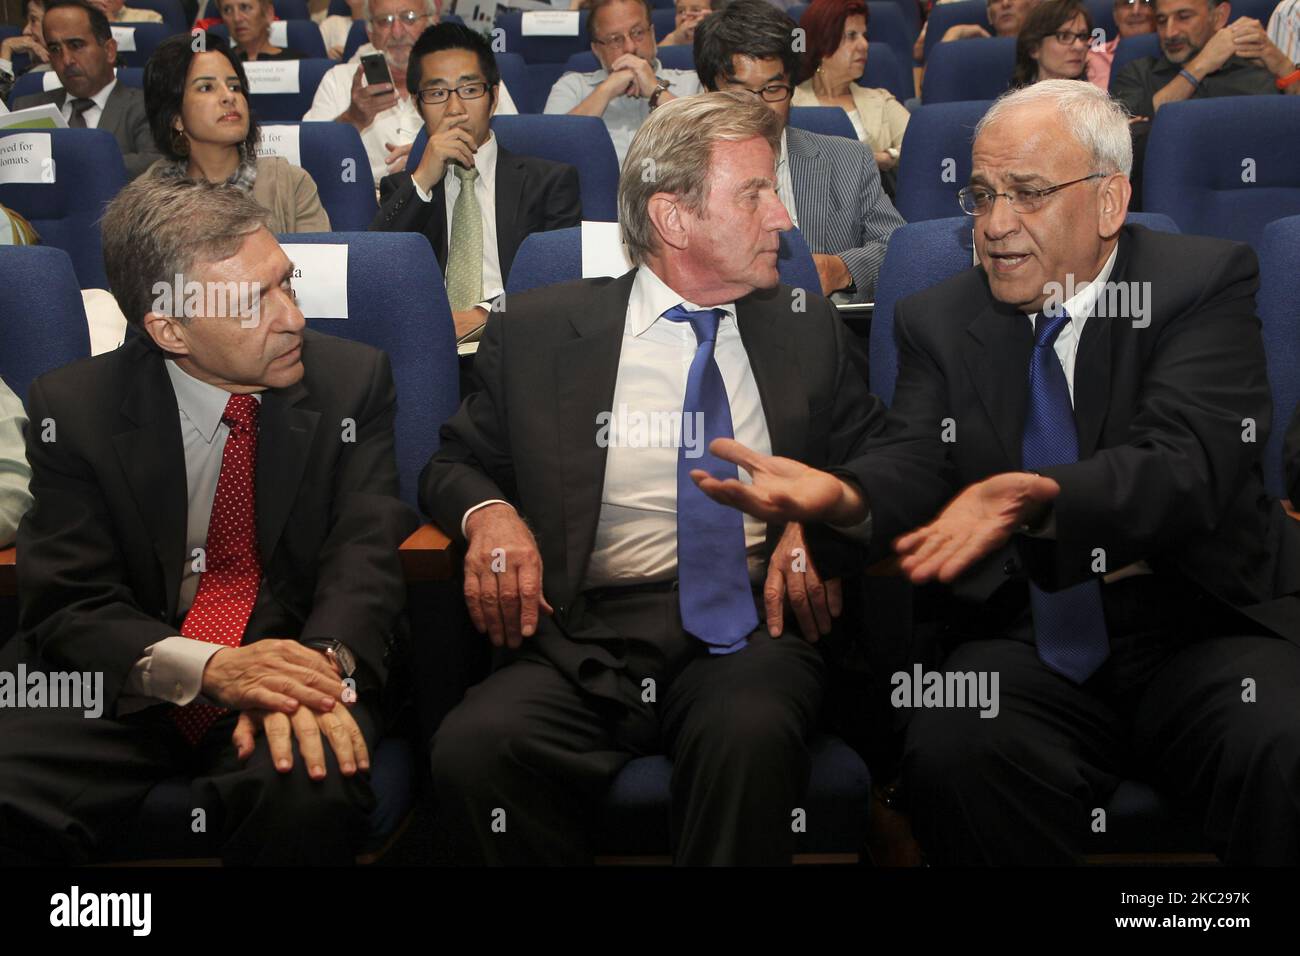 Senior Palestinian politician and diplomat and top PLO official Saeb Erekat (right) talking with former Israeli government minister Yossi Beilin (left) and former French foreign minister and co-founder of Médecins Sans Frontières Bernard Kouchner (center) at a conference organized by the Geneva Initiative organization in Tel Aviv, Israel, on 16 May, 2011. Senior Palestinian politician and diplomat and top PLO official Saeb Erekat is in critical condition with COVID-19 after he was hospitalized at Israel's Hadassah Medical Center in Jerusalem on Sunday, 18 October, 2020. (Photo by Mati Milstein Stock Photo